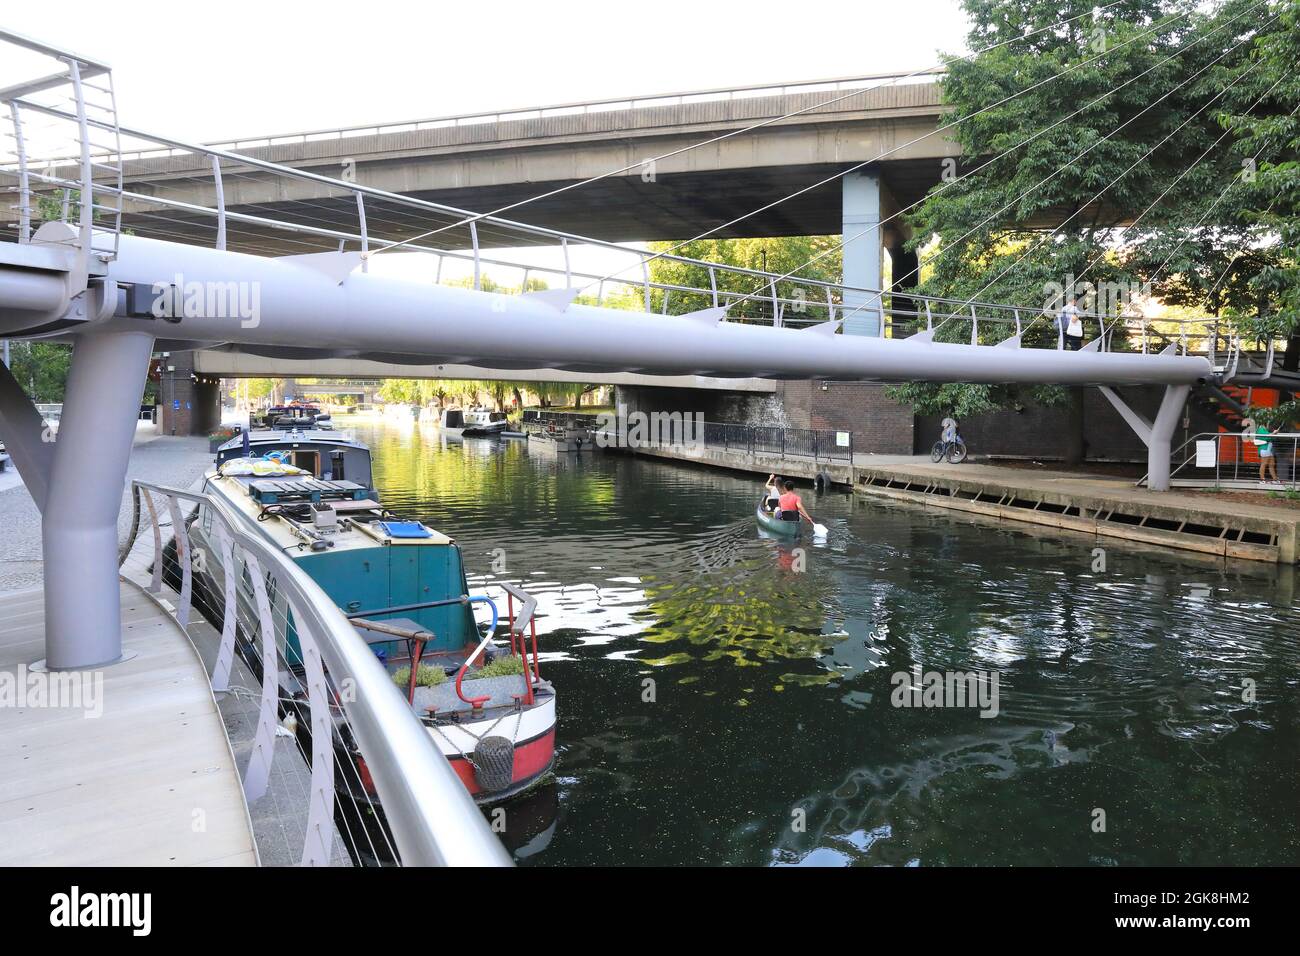 Boating on the Grand Union Canal, at Paddington Central and under the A40 flyover, in west London, UK Stock Photo